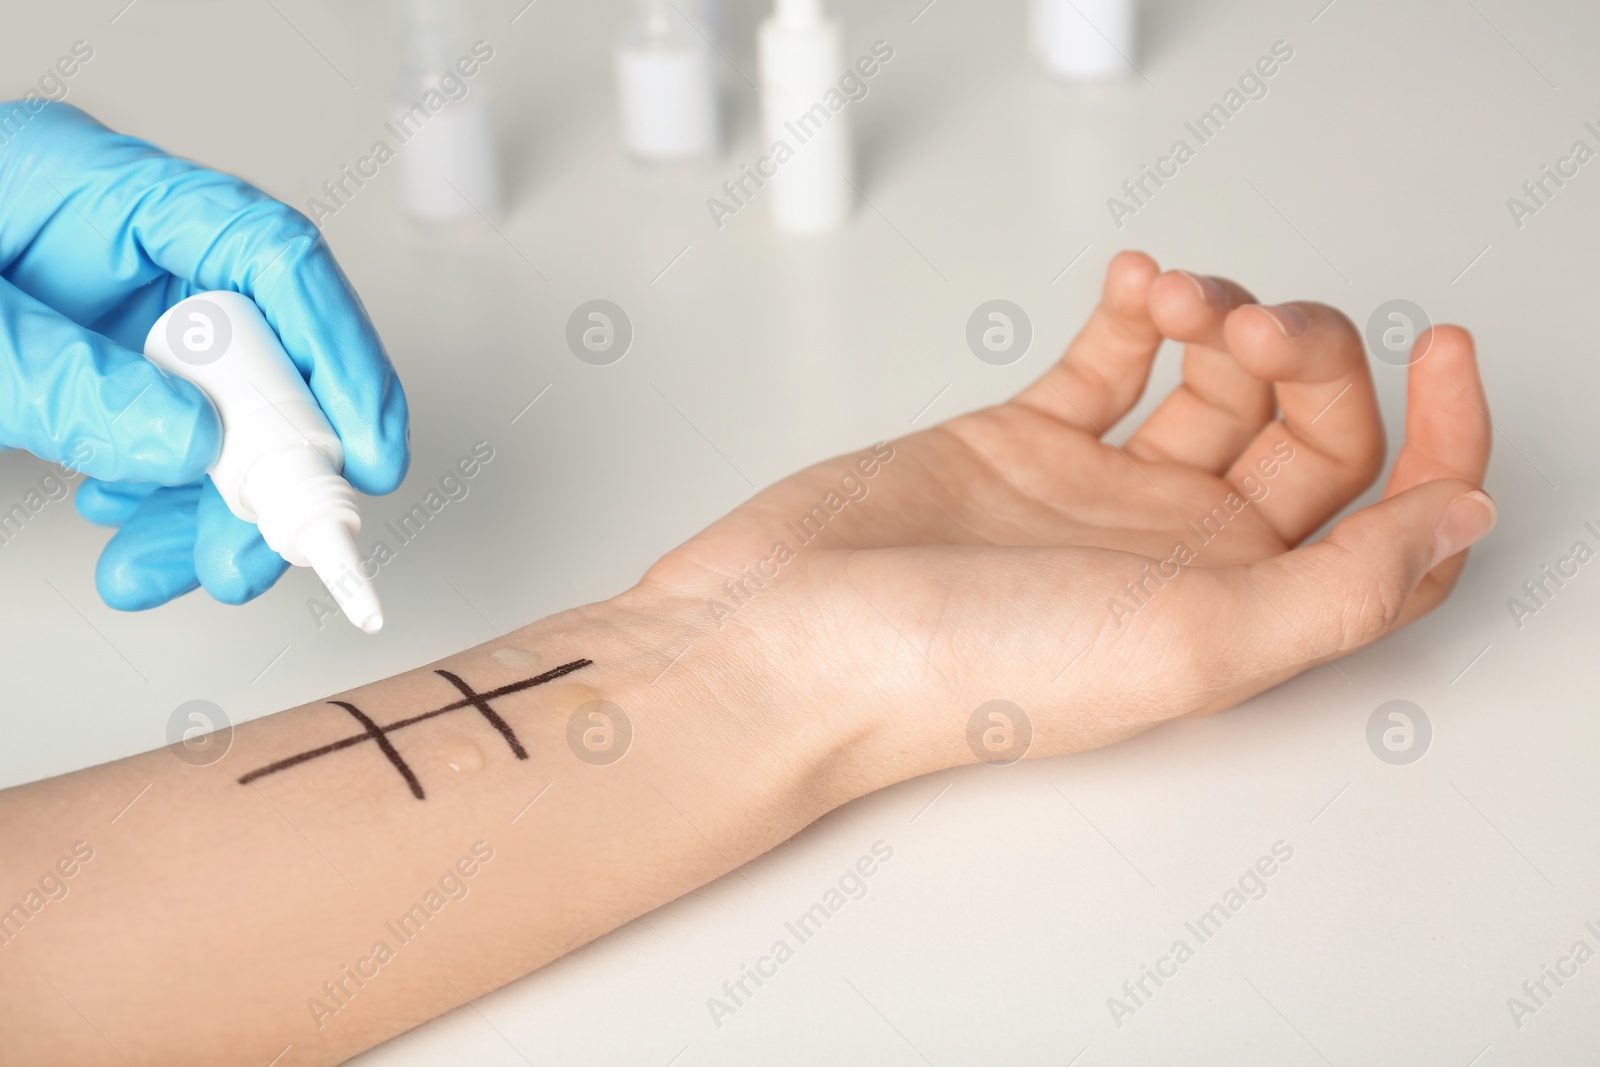 Photo of Doctor making allergy test at table, closeup